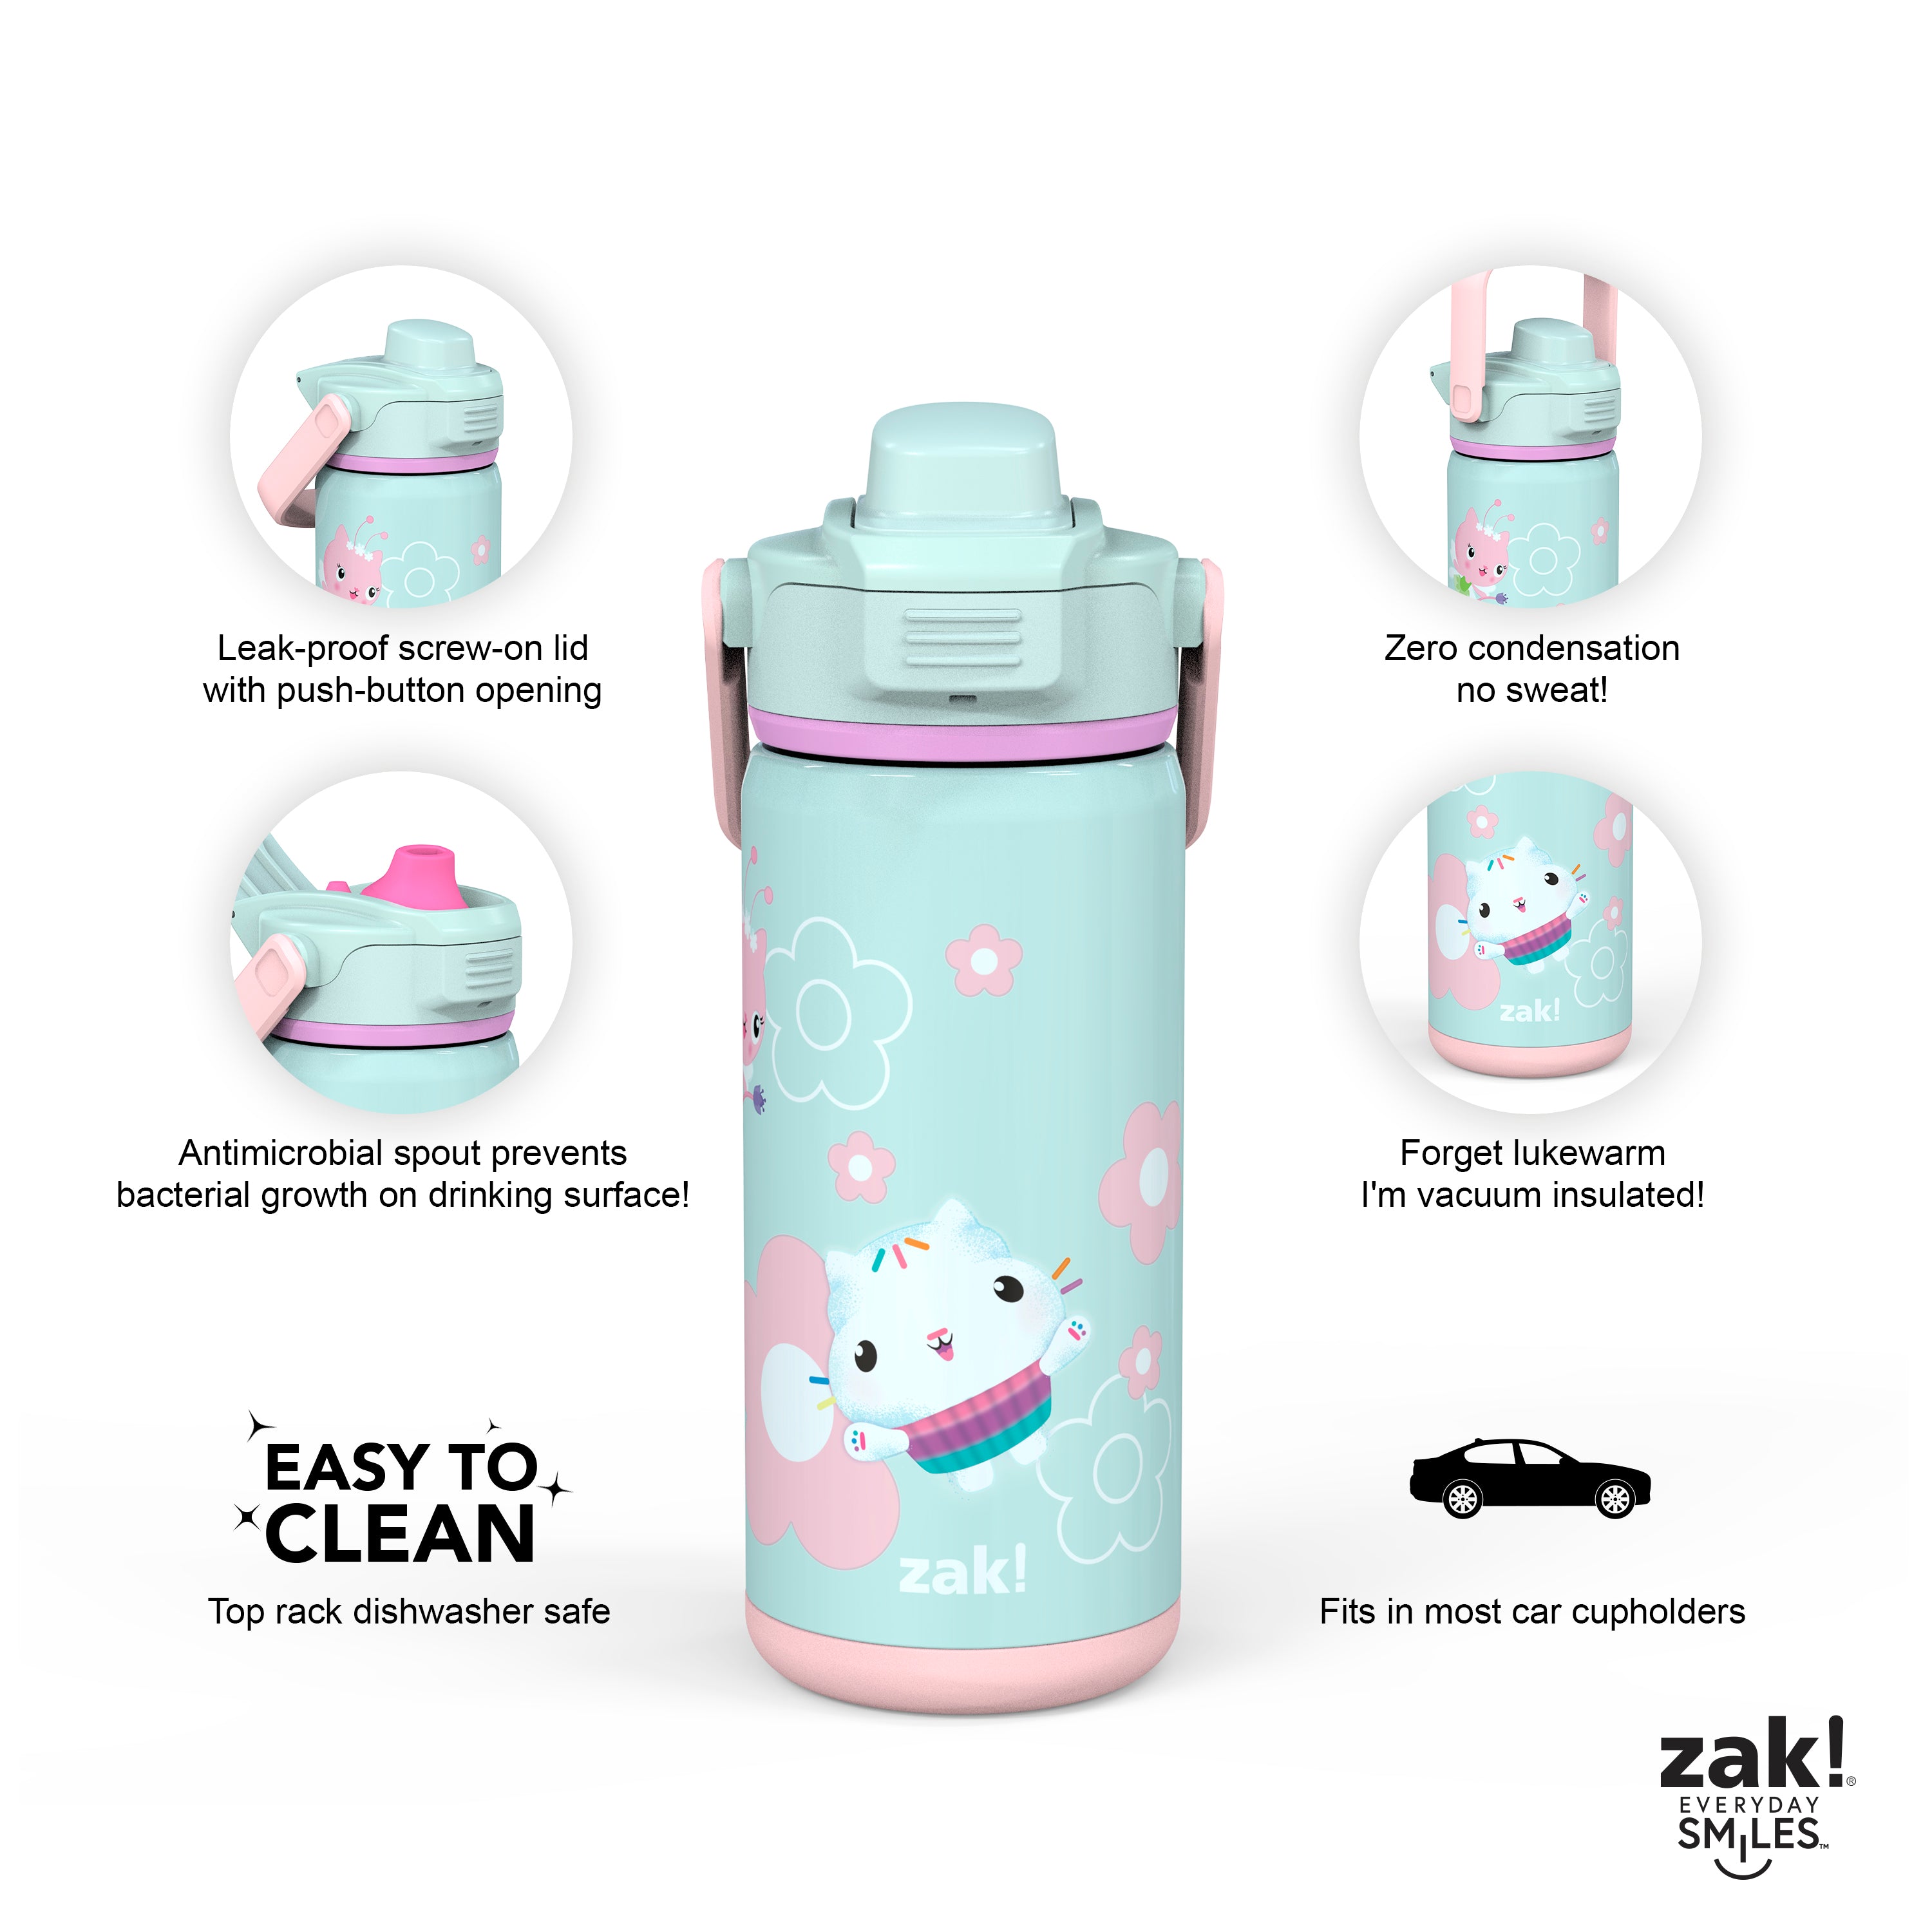 Beacon 14 oz. Insulated Kids Water Bottle from zak! designs 